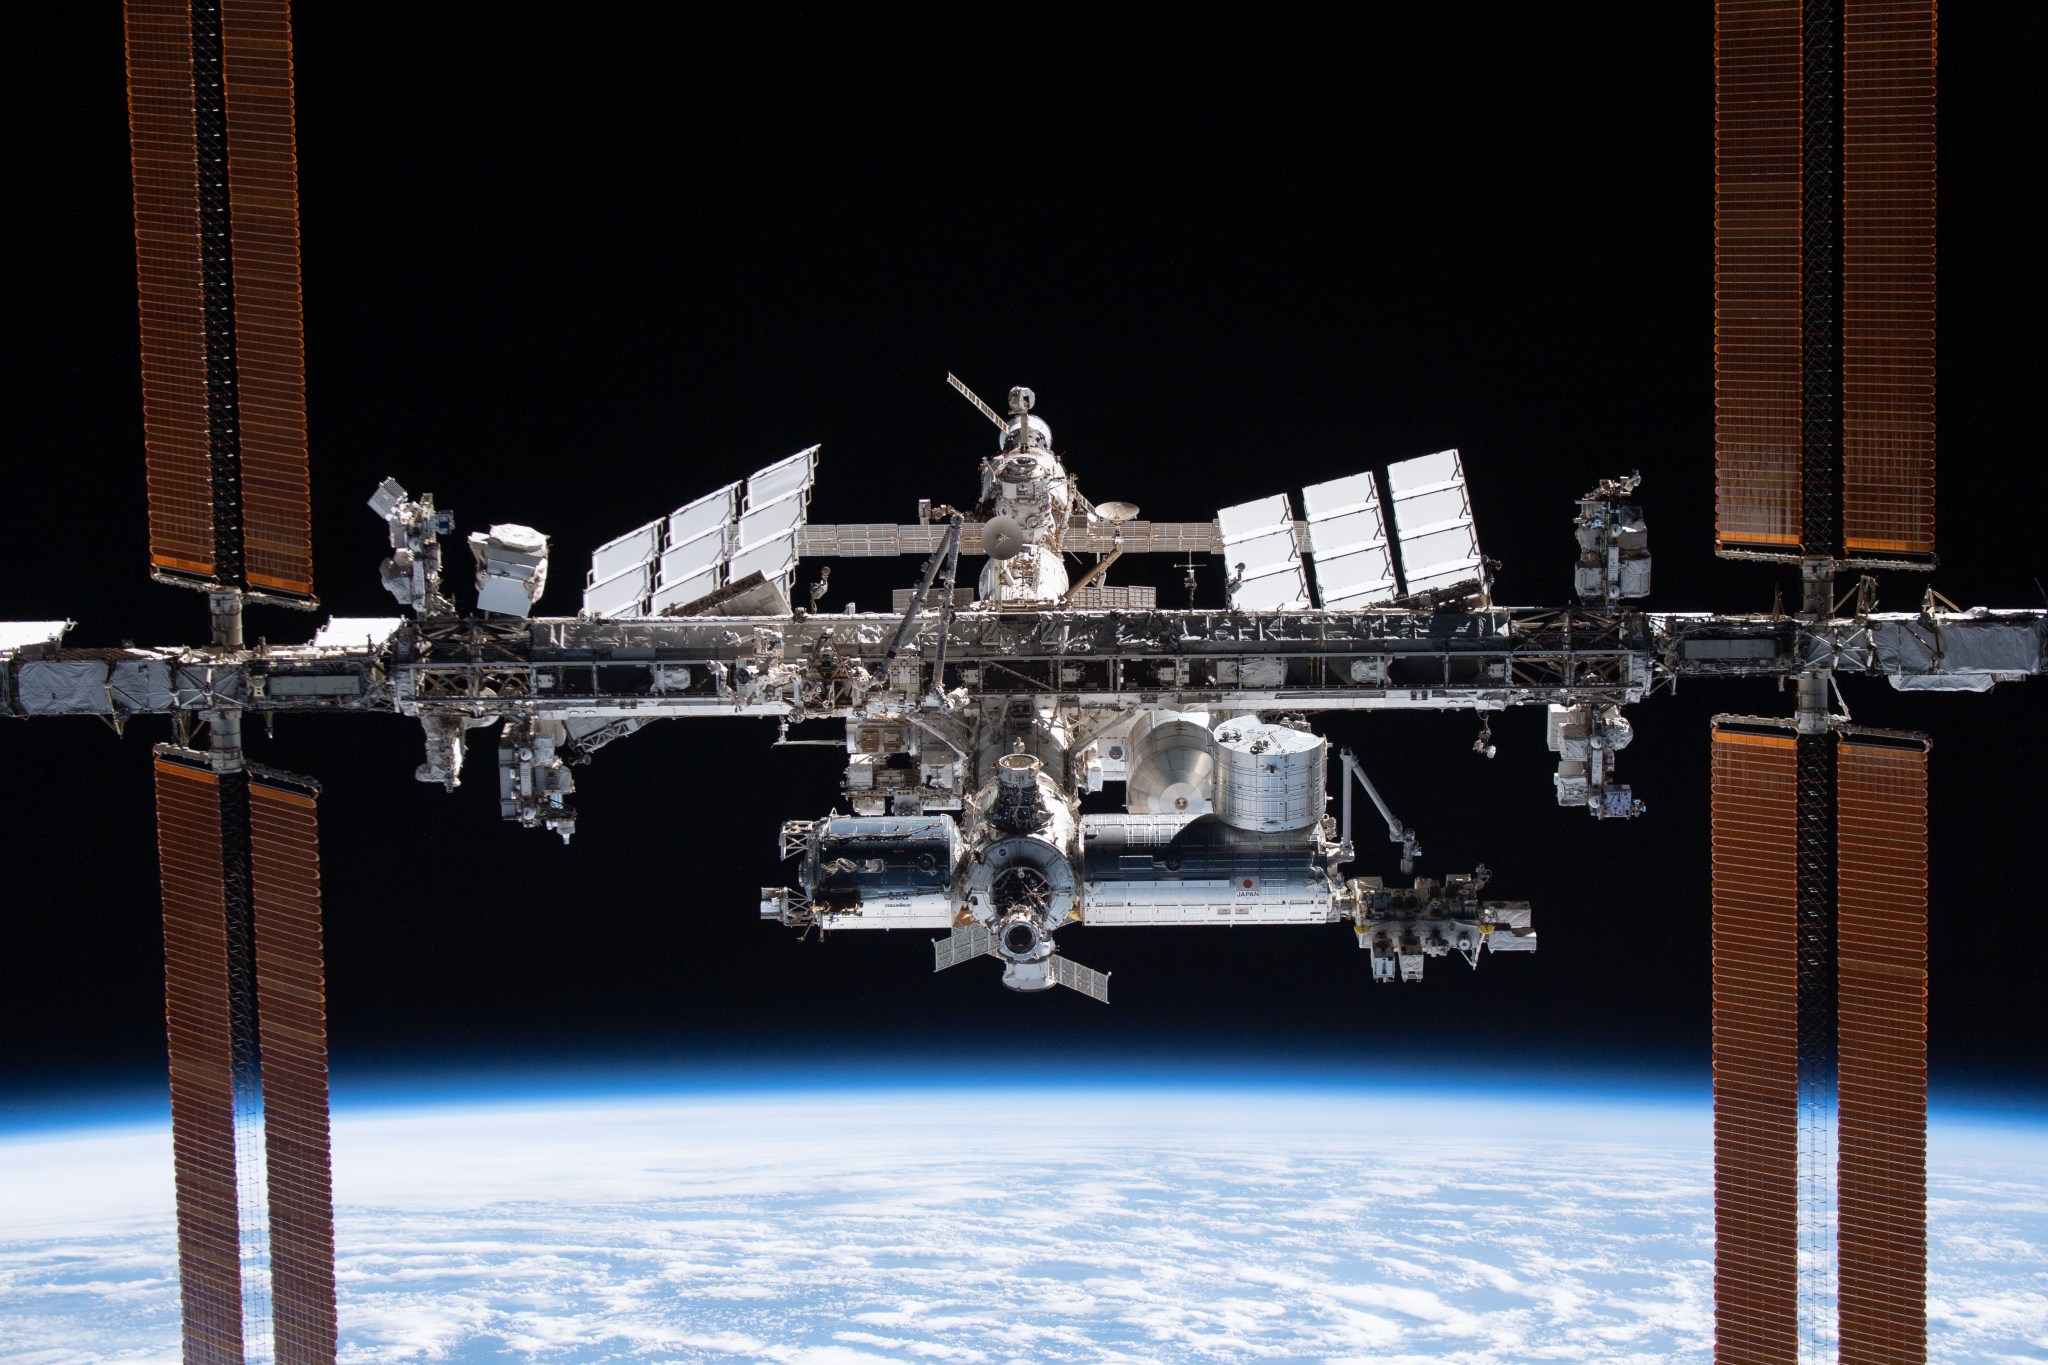 The International Space Station is pictured from the SpaceX Crew Dragon Endeavour during a fly around of the orbiting lab that took place following its undocking from the Harmony module’s space-facing port on Nov. 8, 2021. The orbital complex was flying 263 miles above the Marshall Islands in the Pacific Ocean when this photograph was taken.